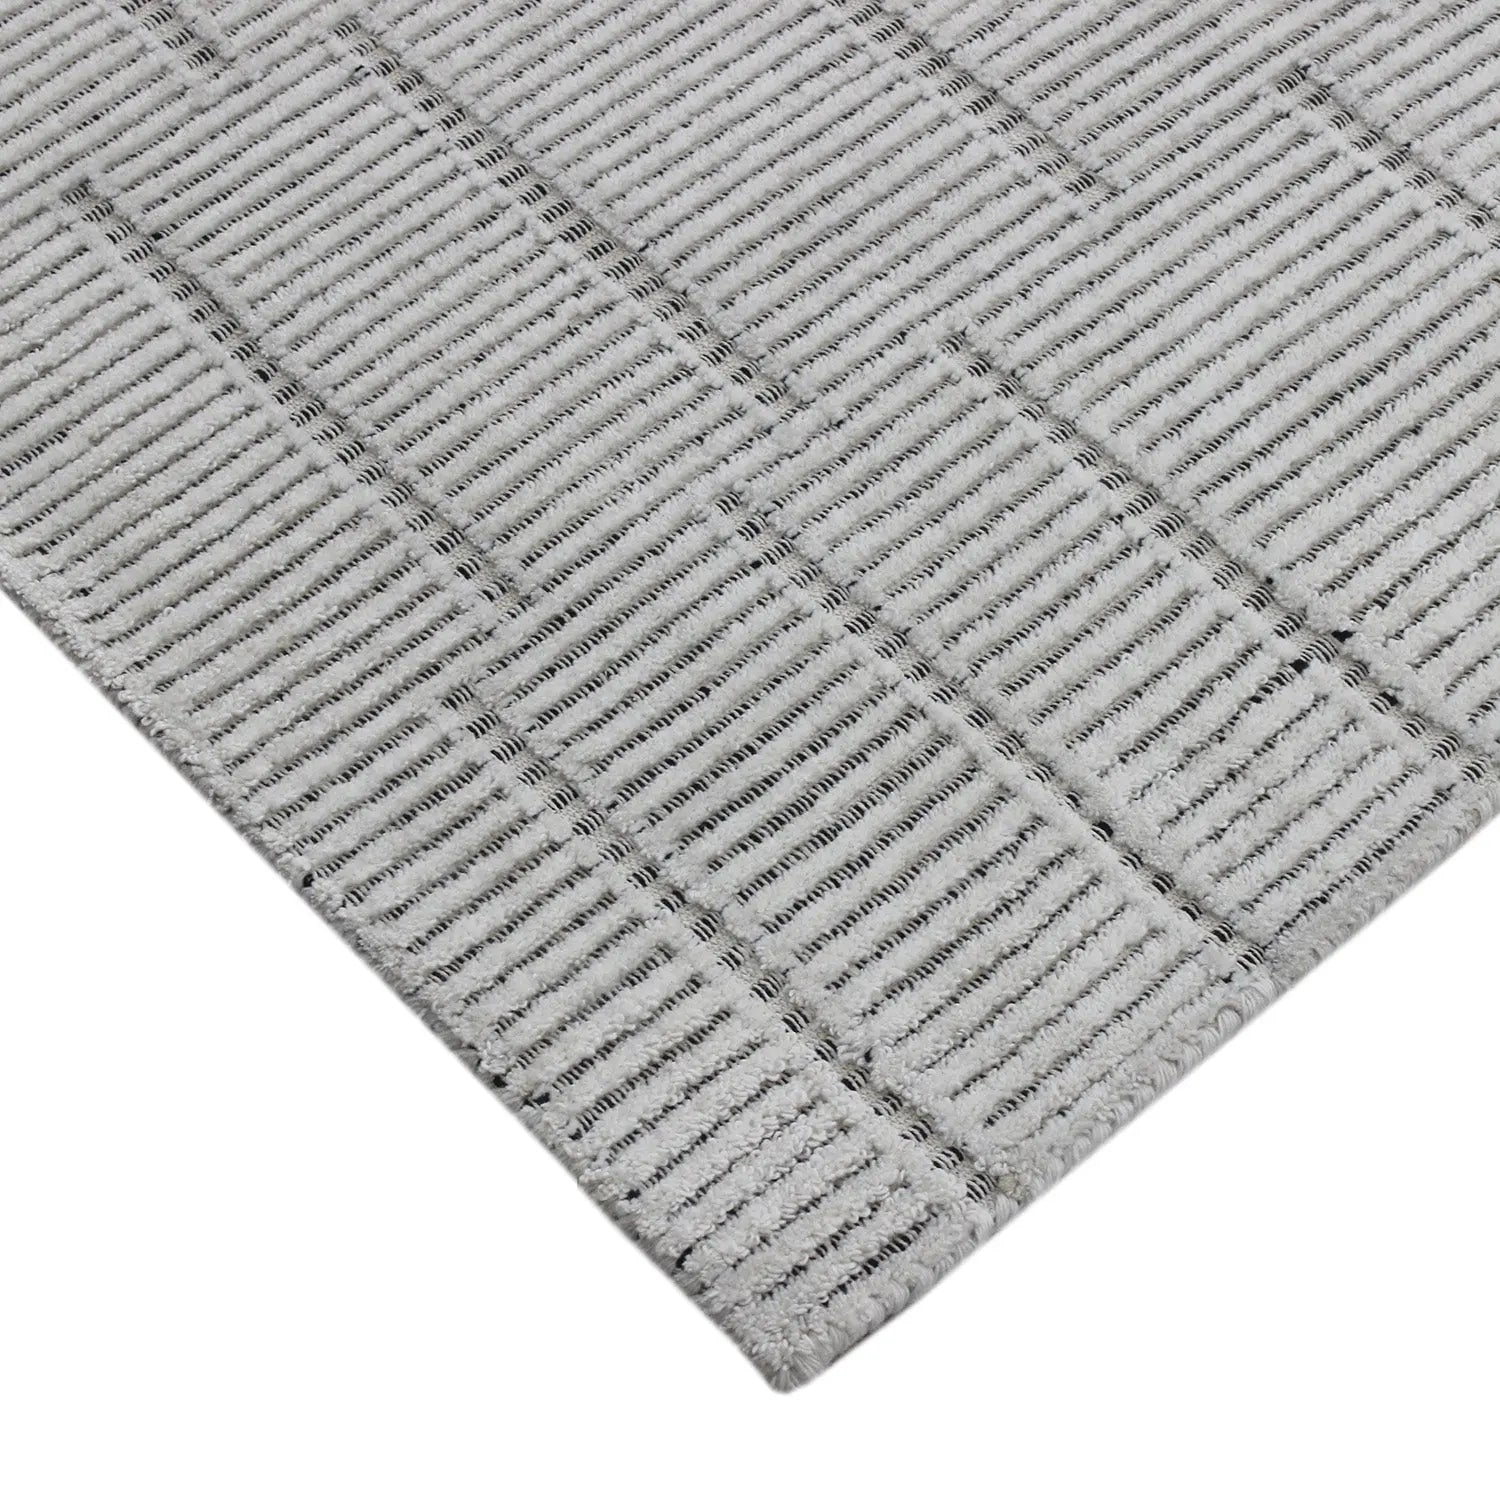 Lacey Abstract Stripe Natural Wool Rug - Rugs a Million